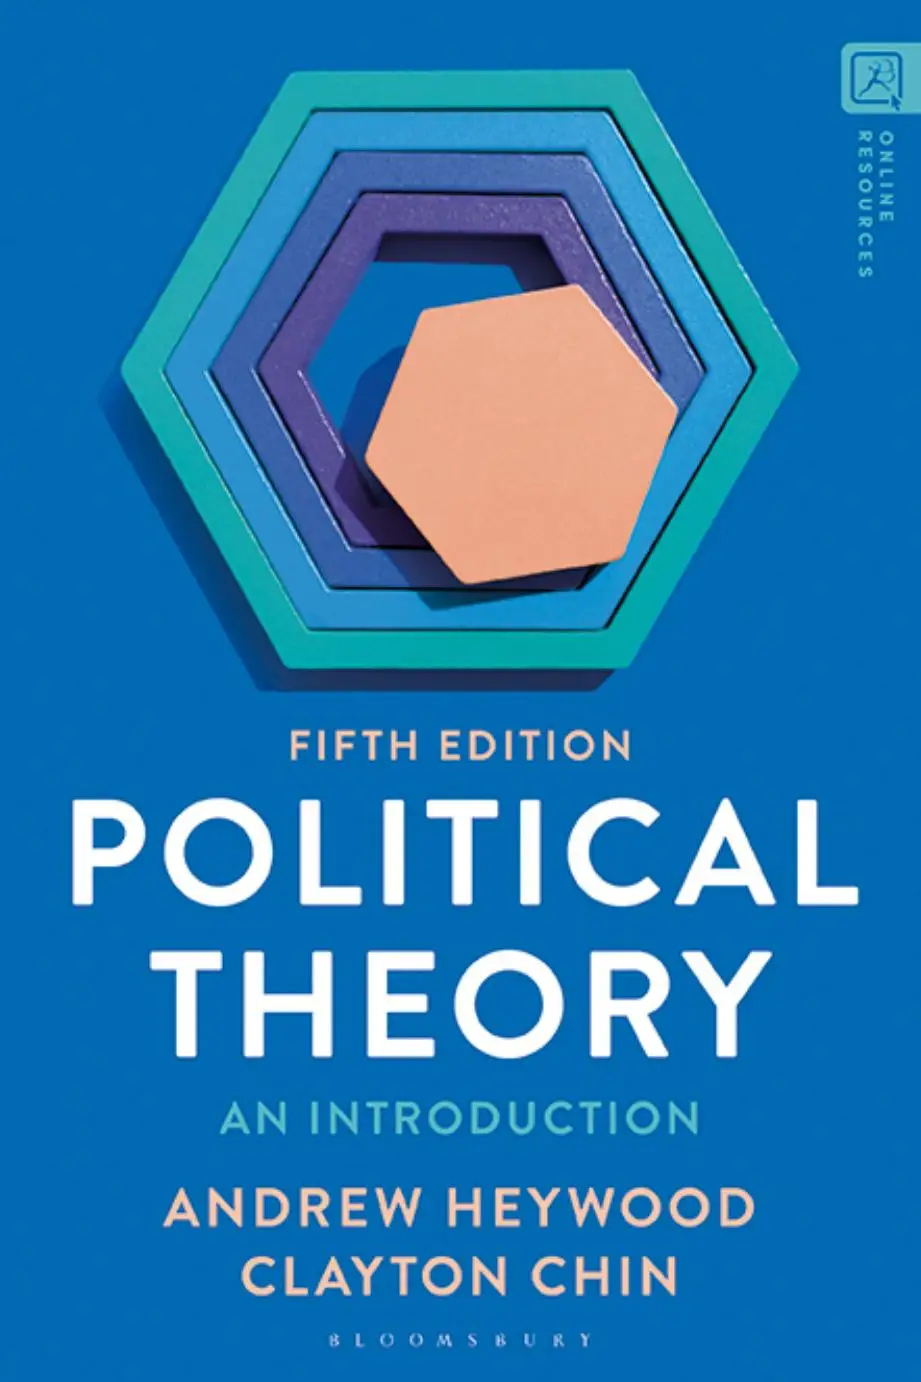 political theory research paper topics